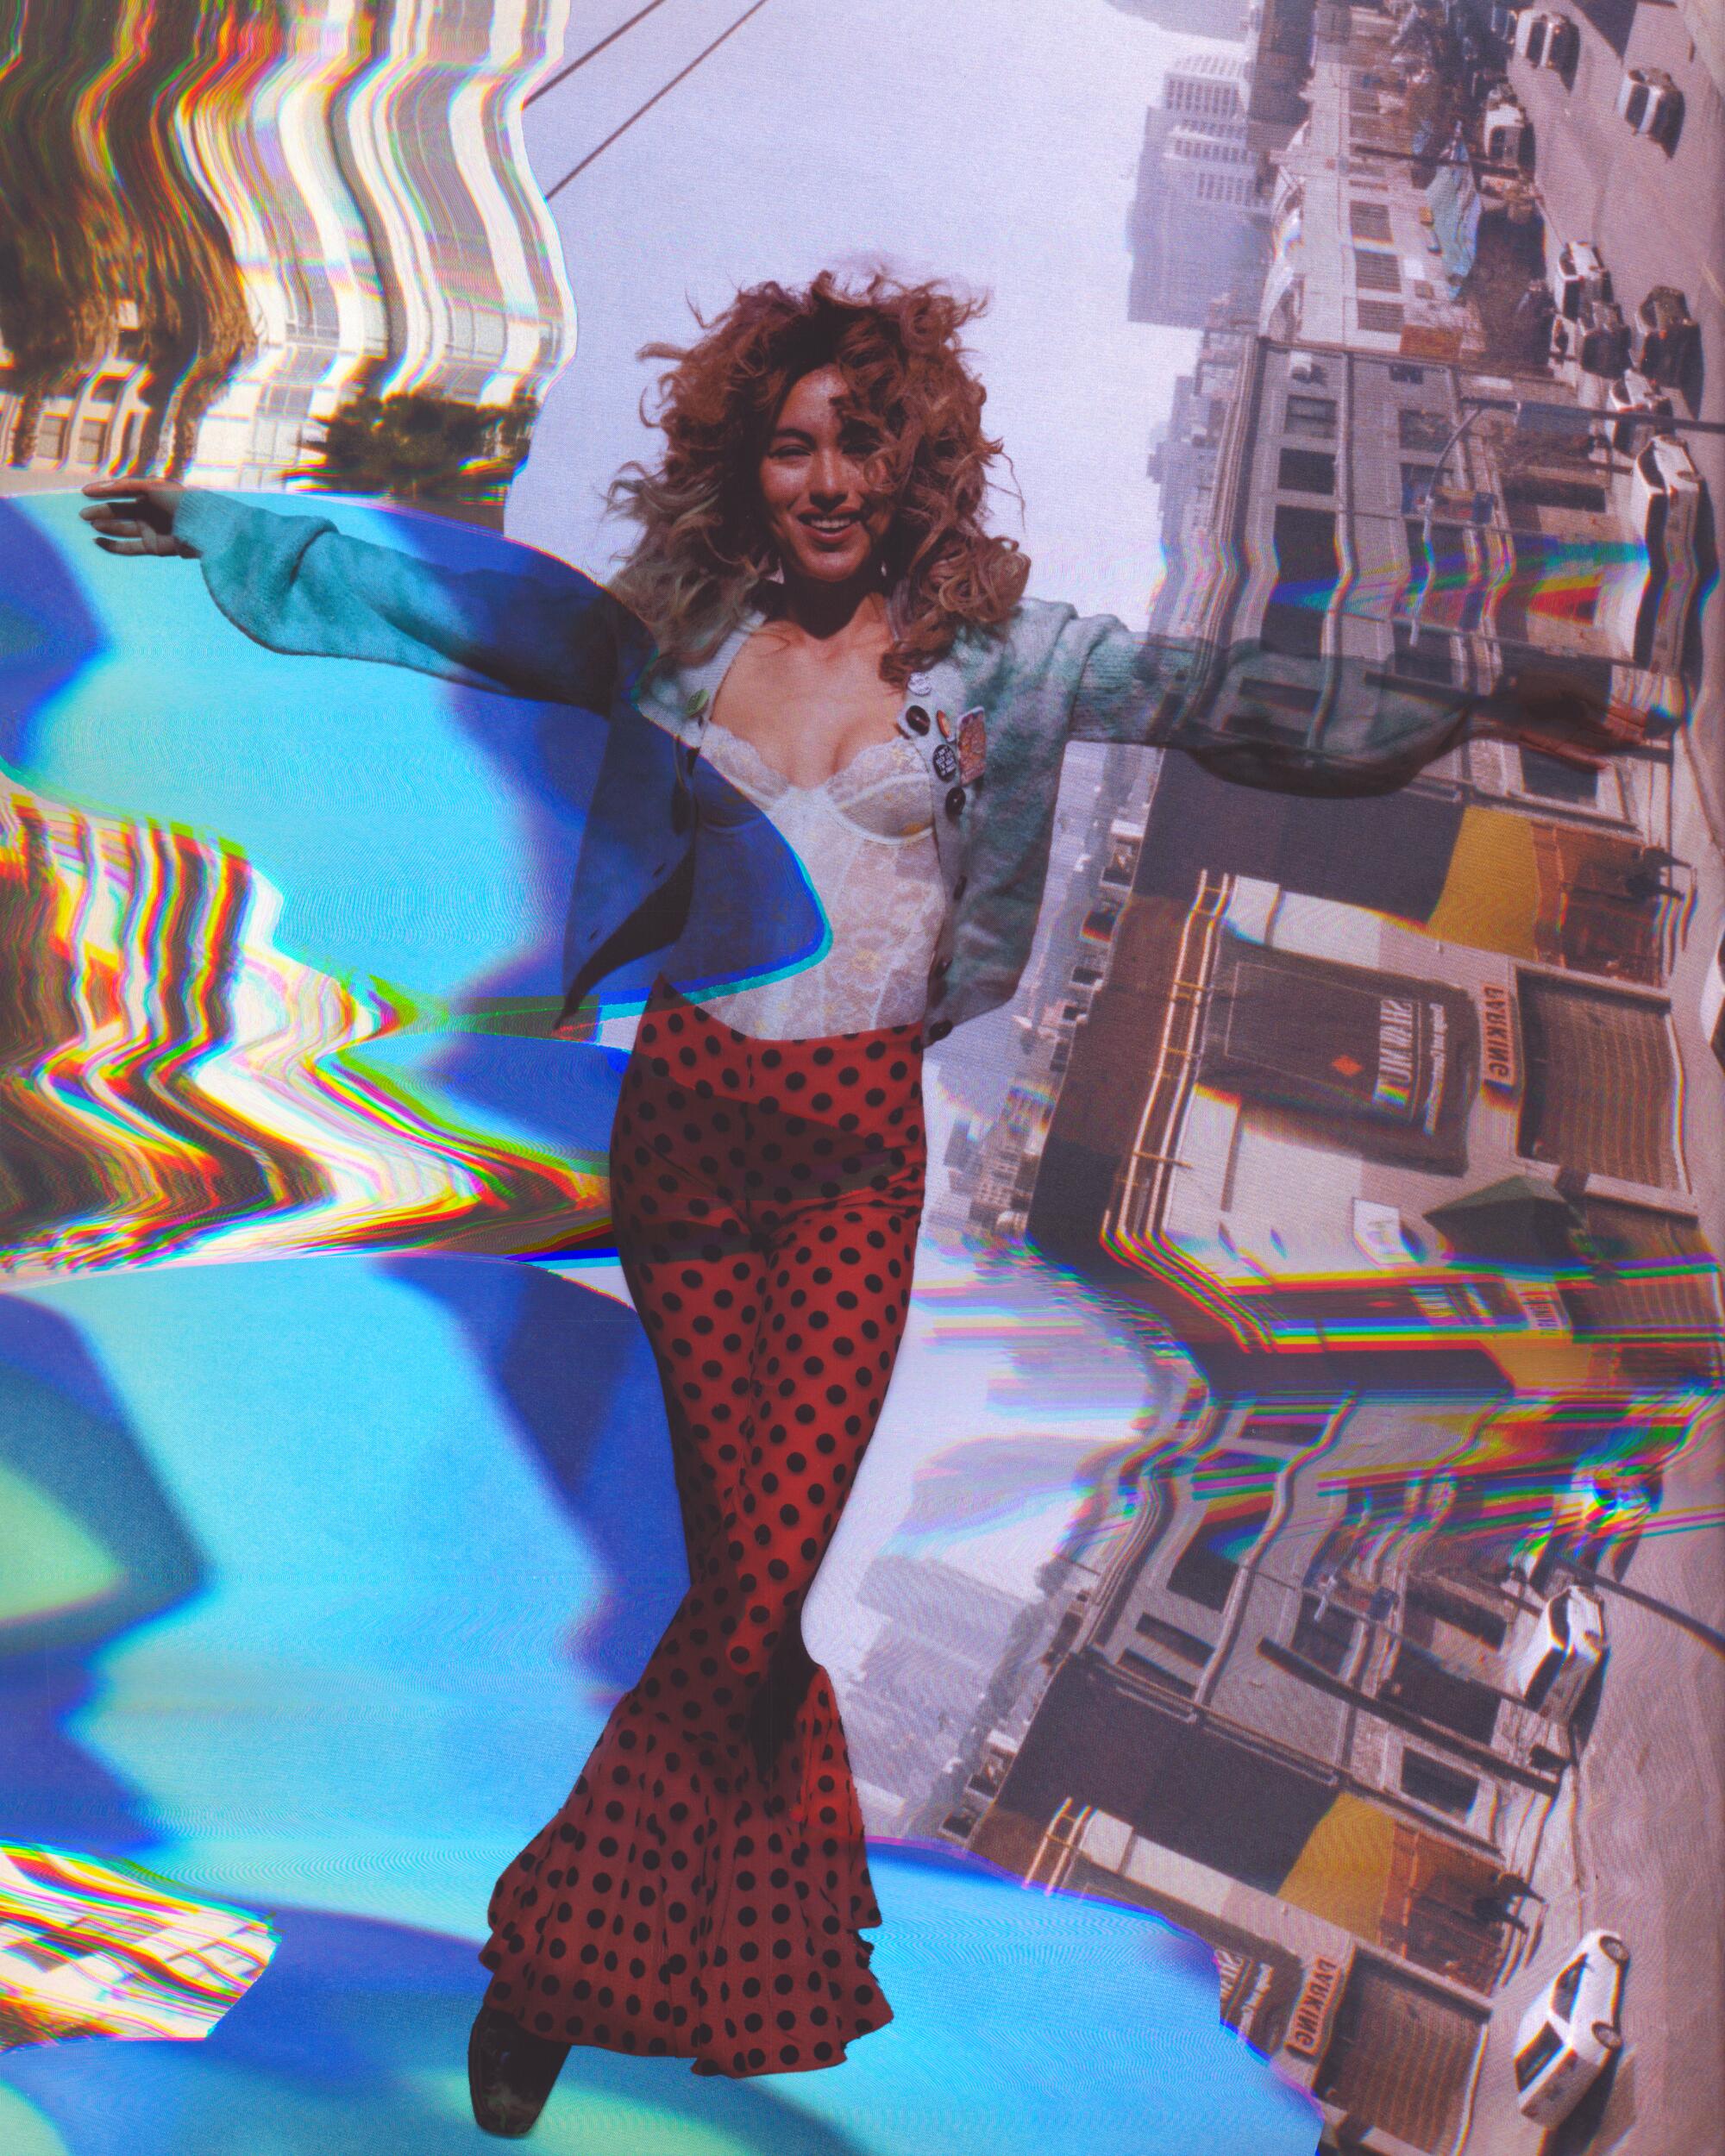 A woman stands in front of a distorted, multicolored image of a street scene